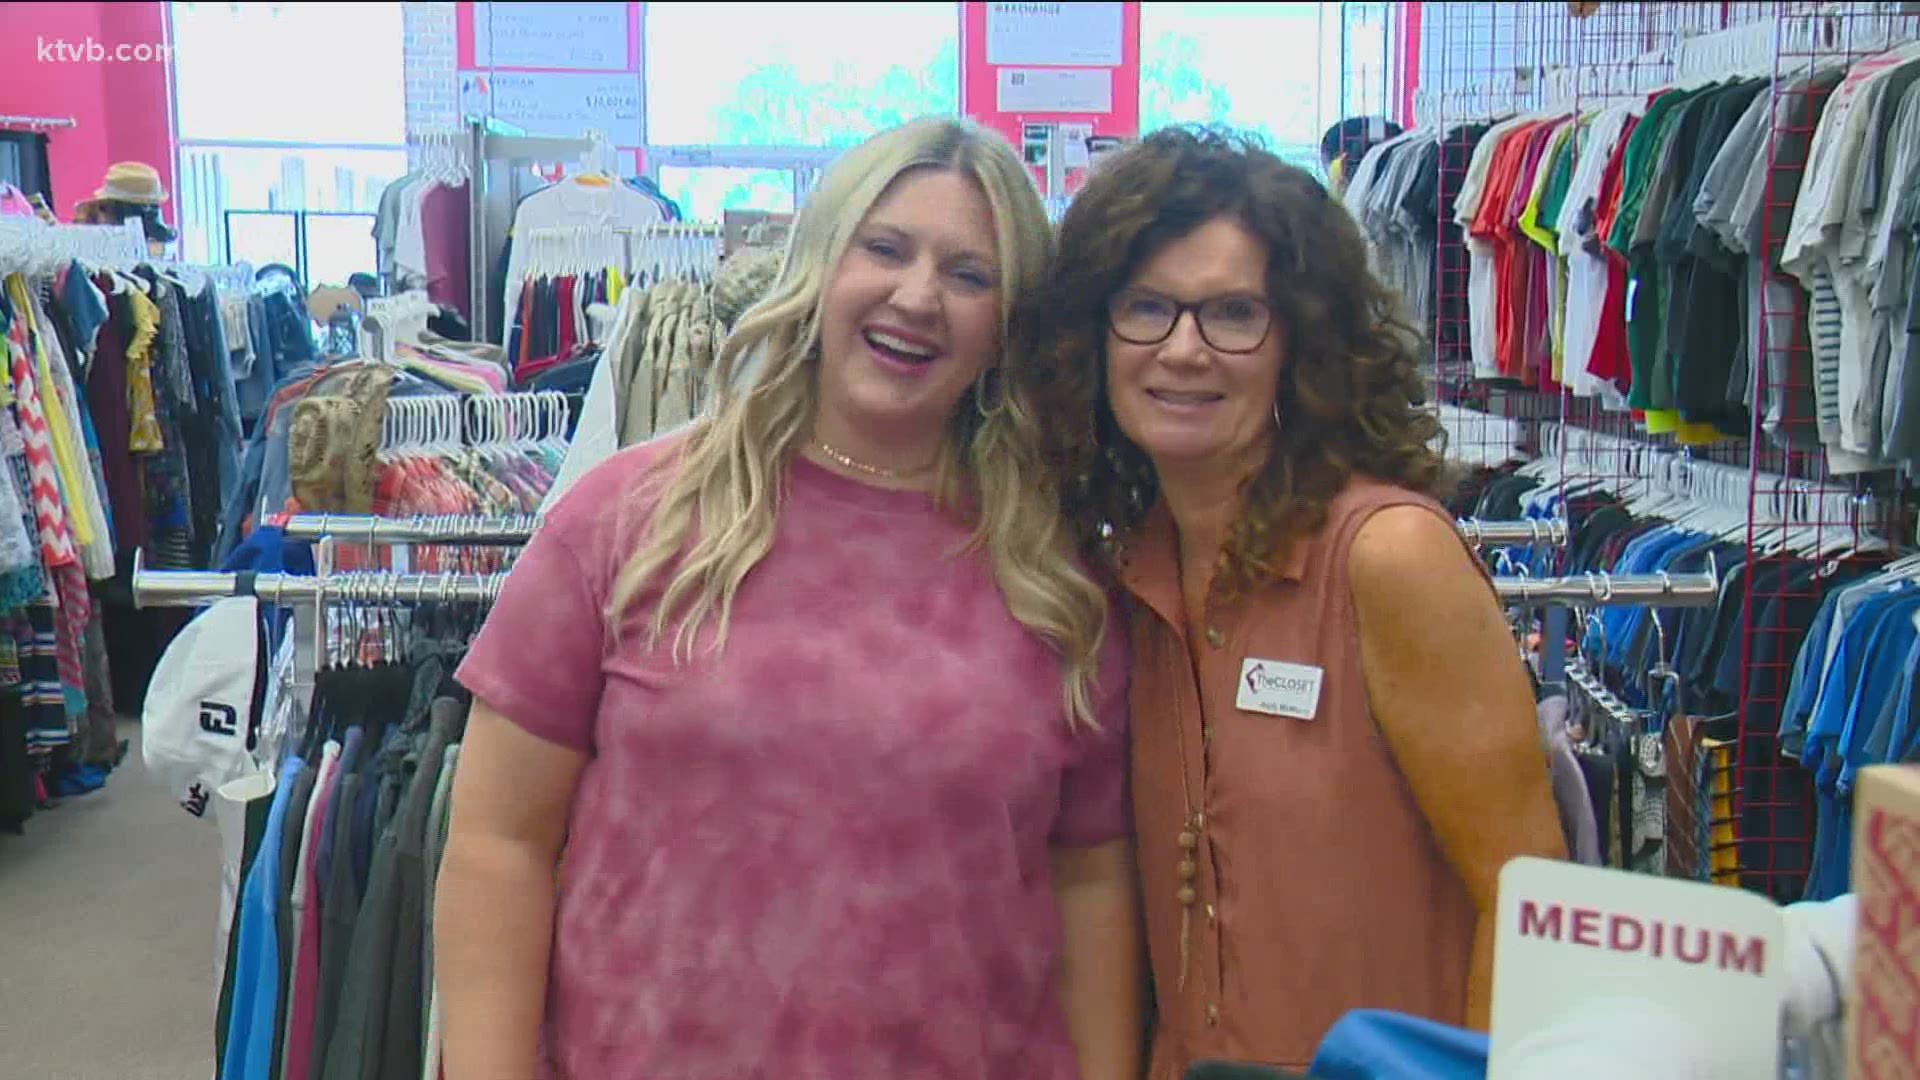 The Closet is a Boise nonprofit that provides free clothing to teenagers in need. They recently got a big donation from Sara Wells who reached out to her followers.